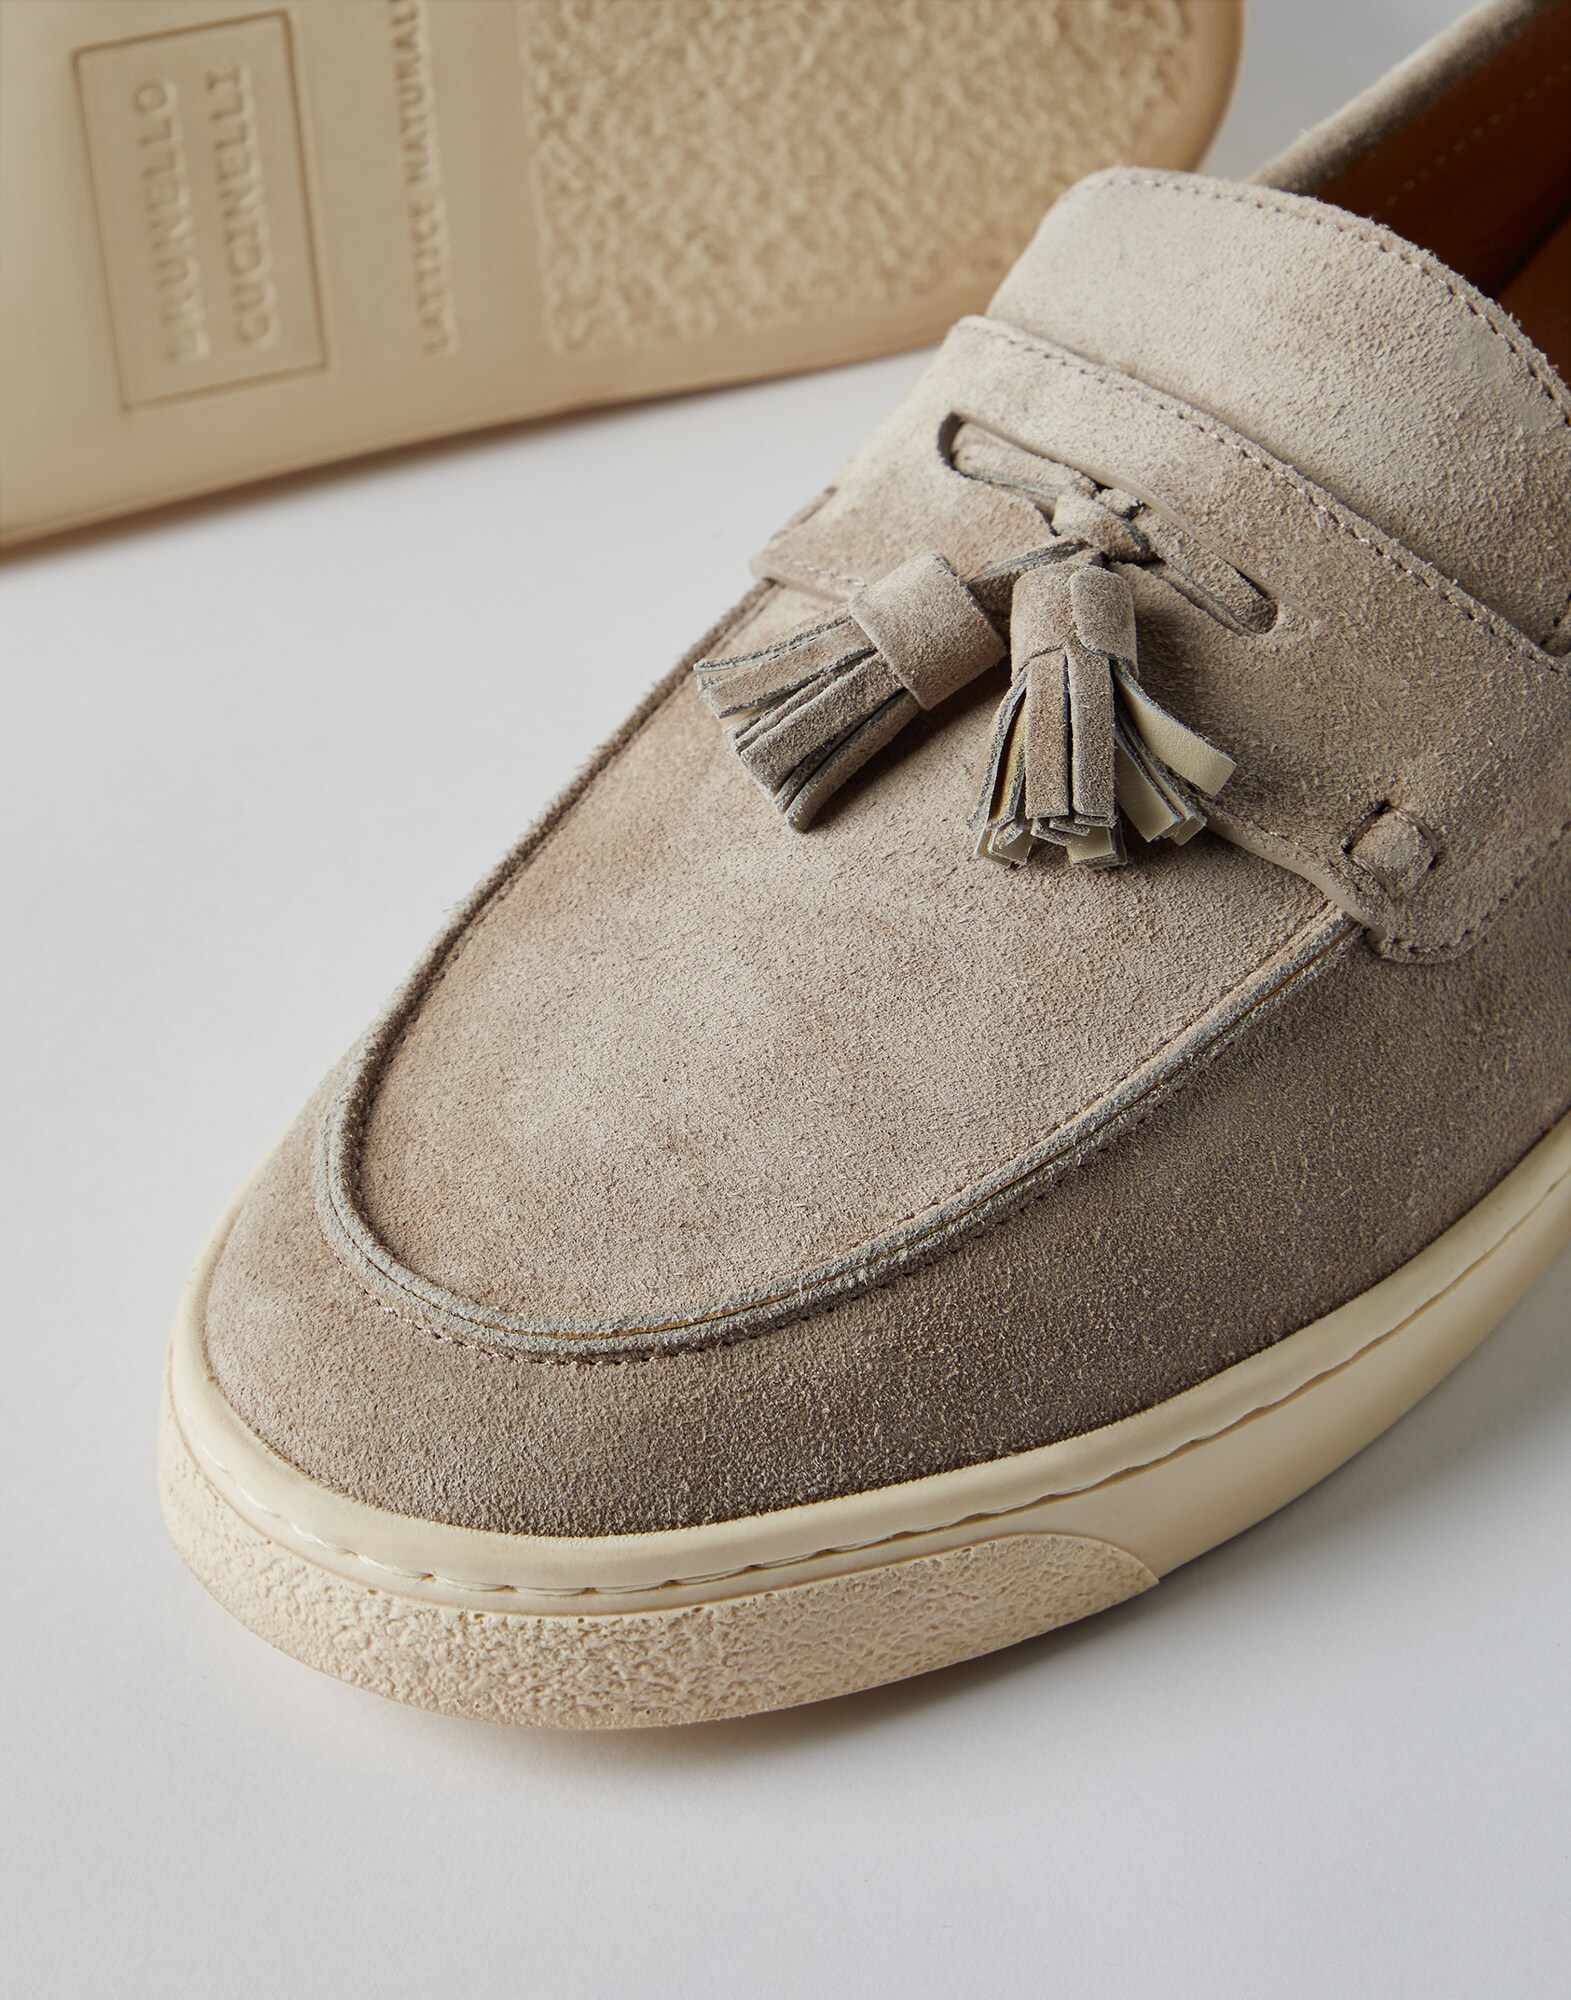 Loafer sneakers Light Brown Man - Brunello Cucinelli